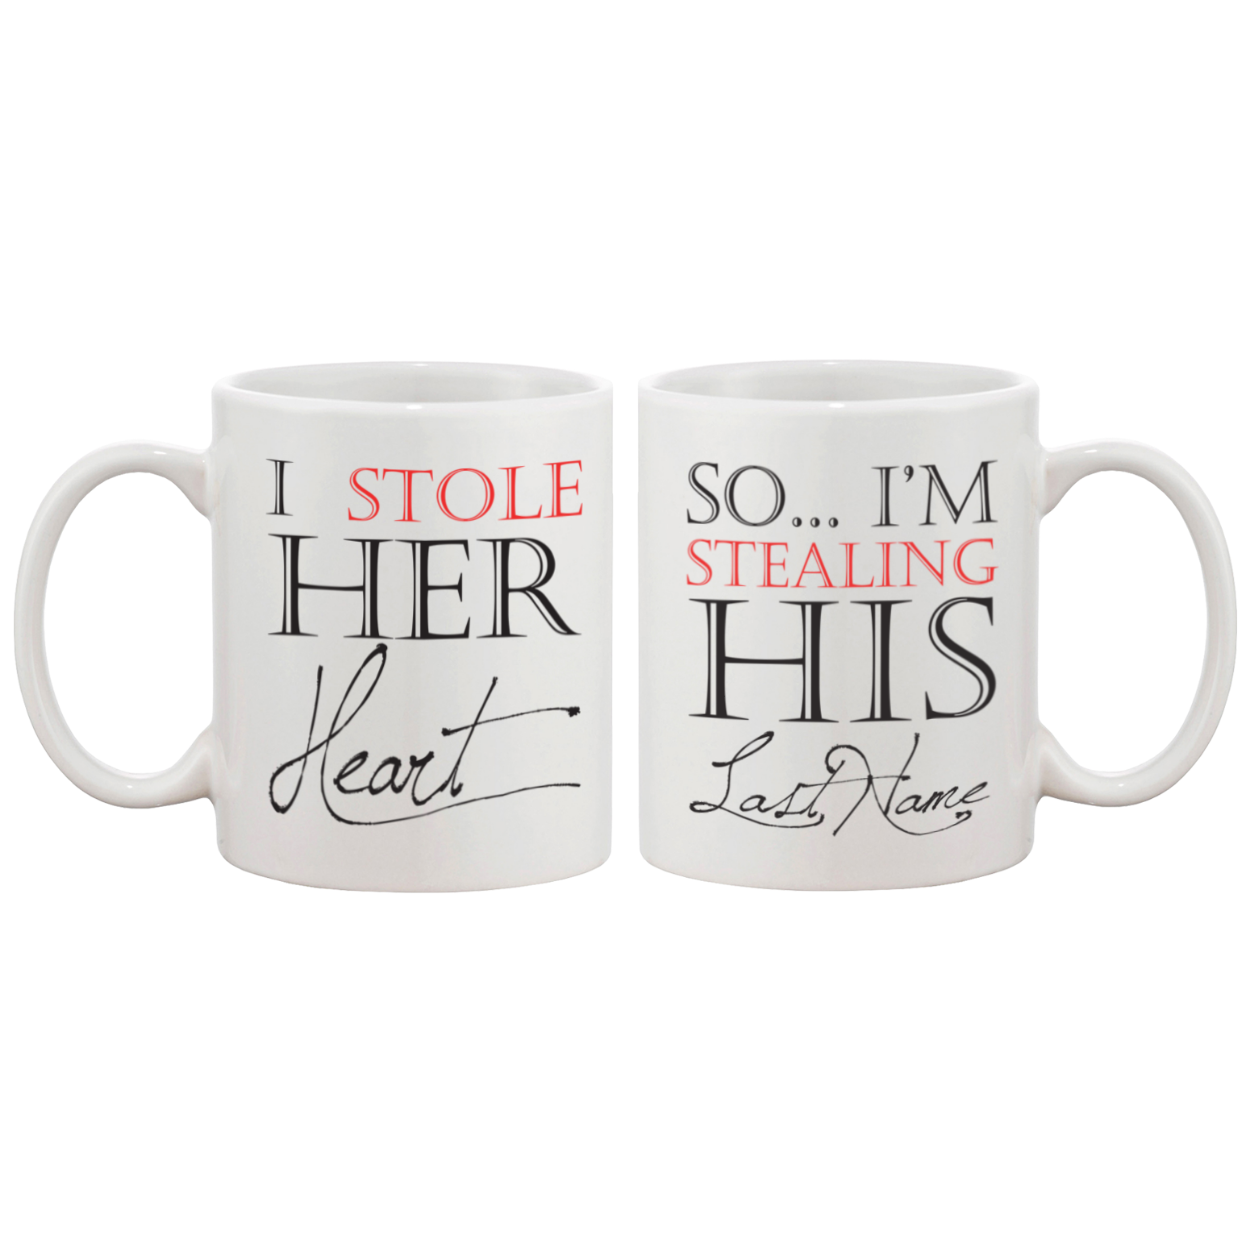 I Stole Her Heart, So I'm Stealing His Last Name Couple Mugs - Matching Cup White